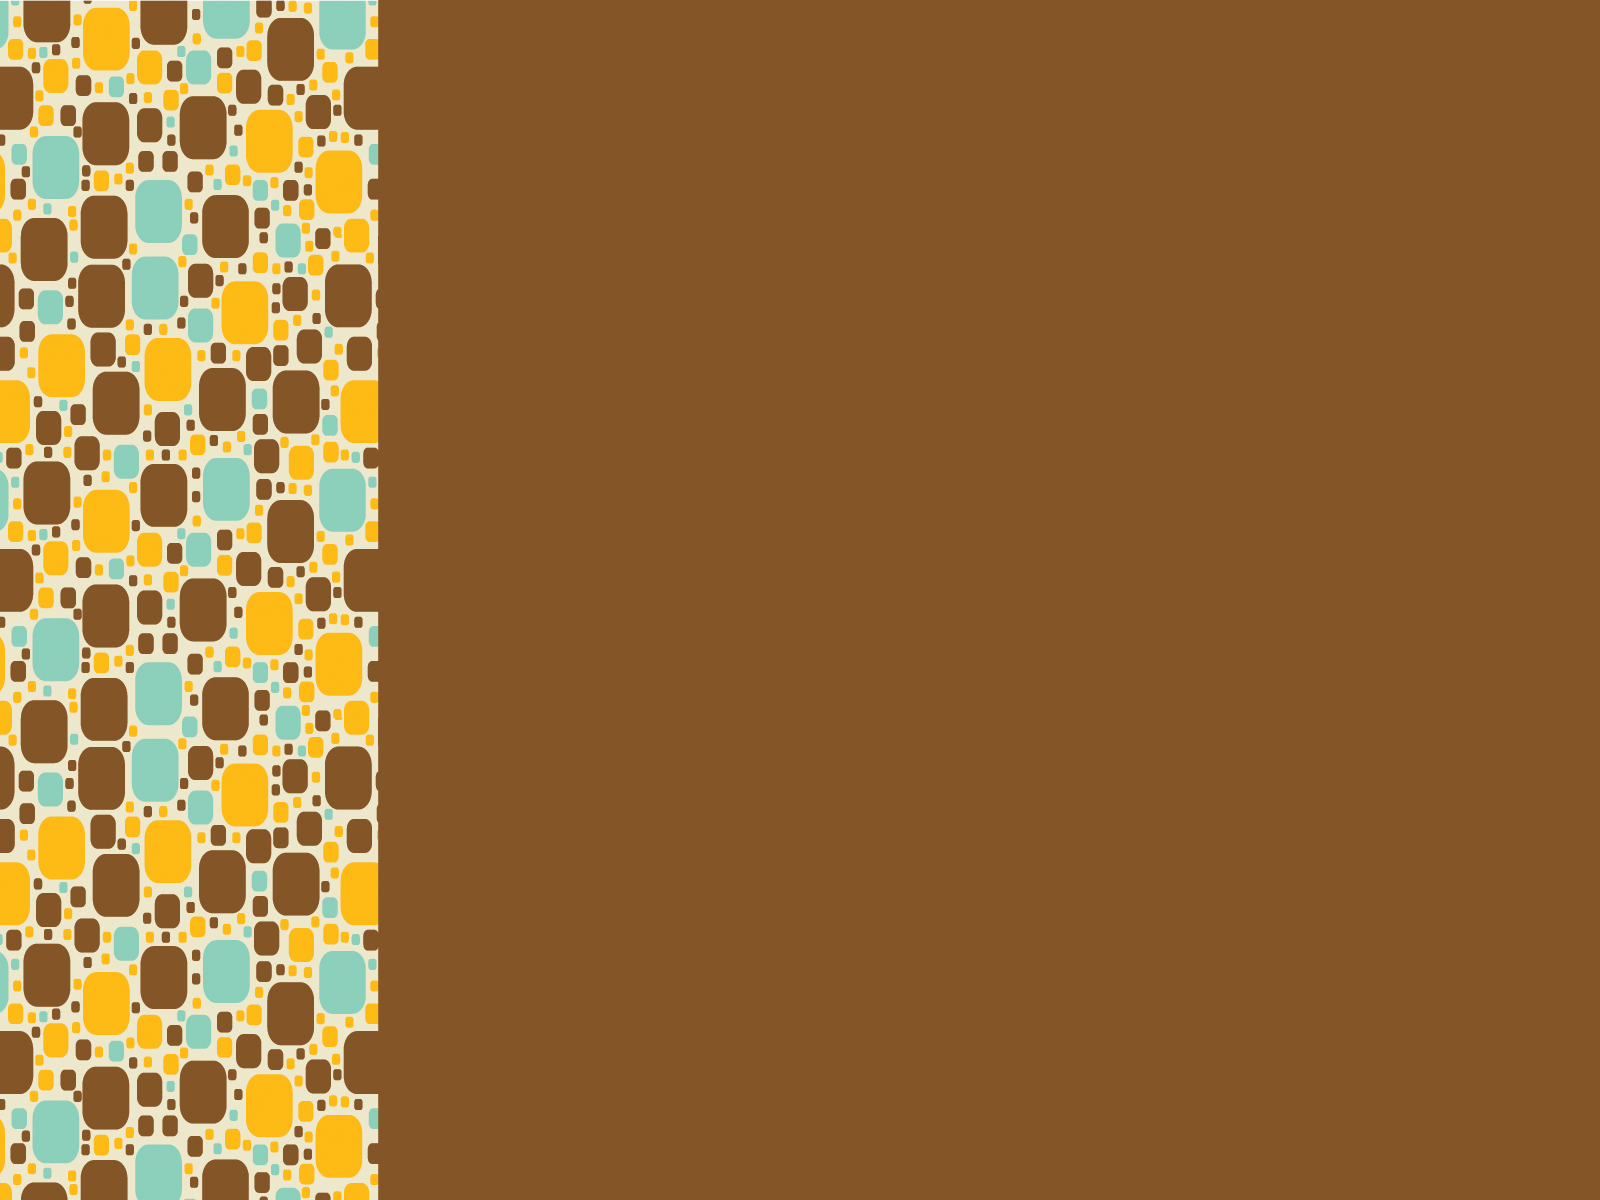 Little Squares Powerpoint Backgrounds - Background Ppt Brown - HD Wallpaper 